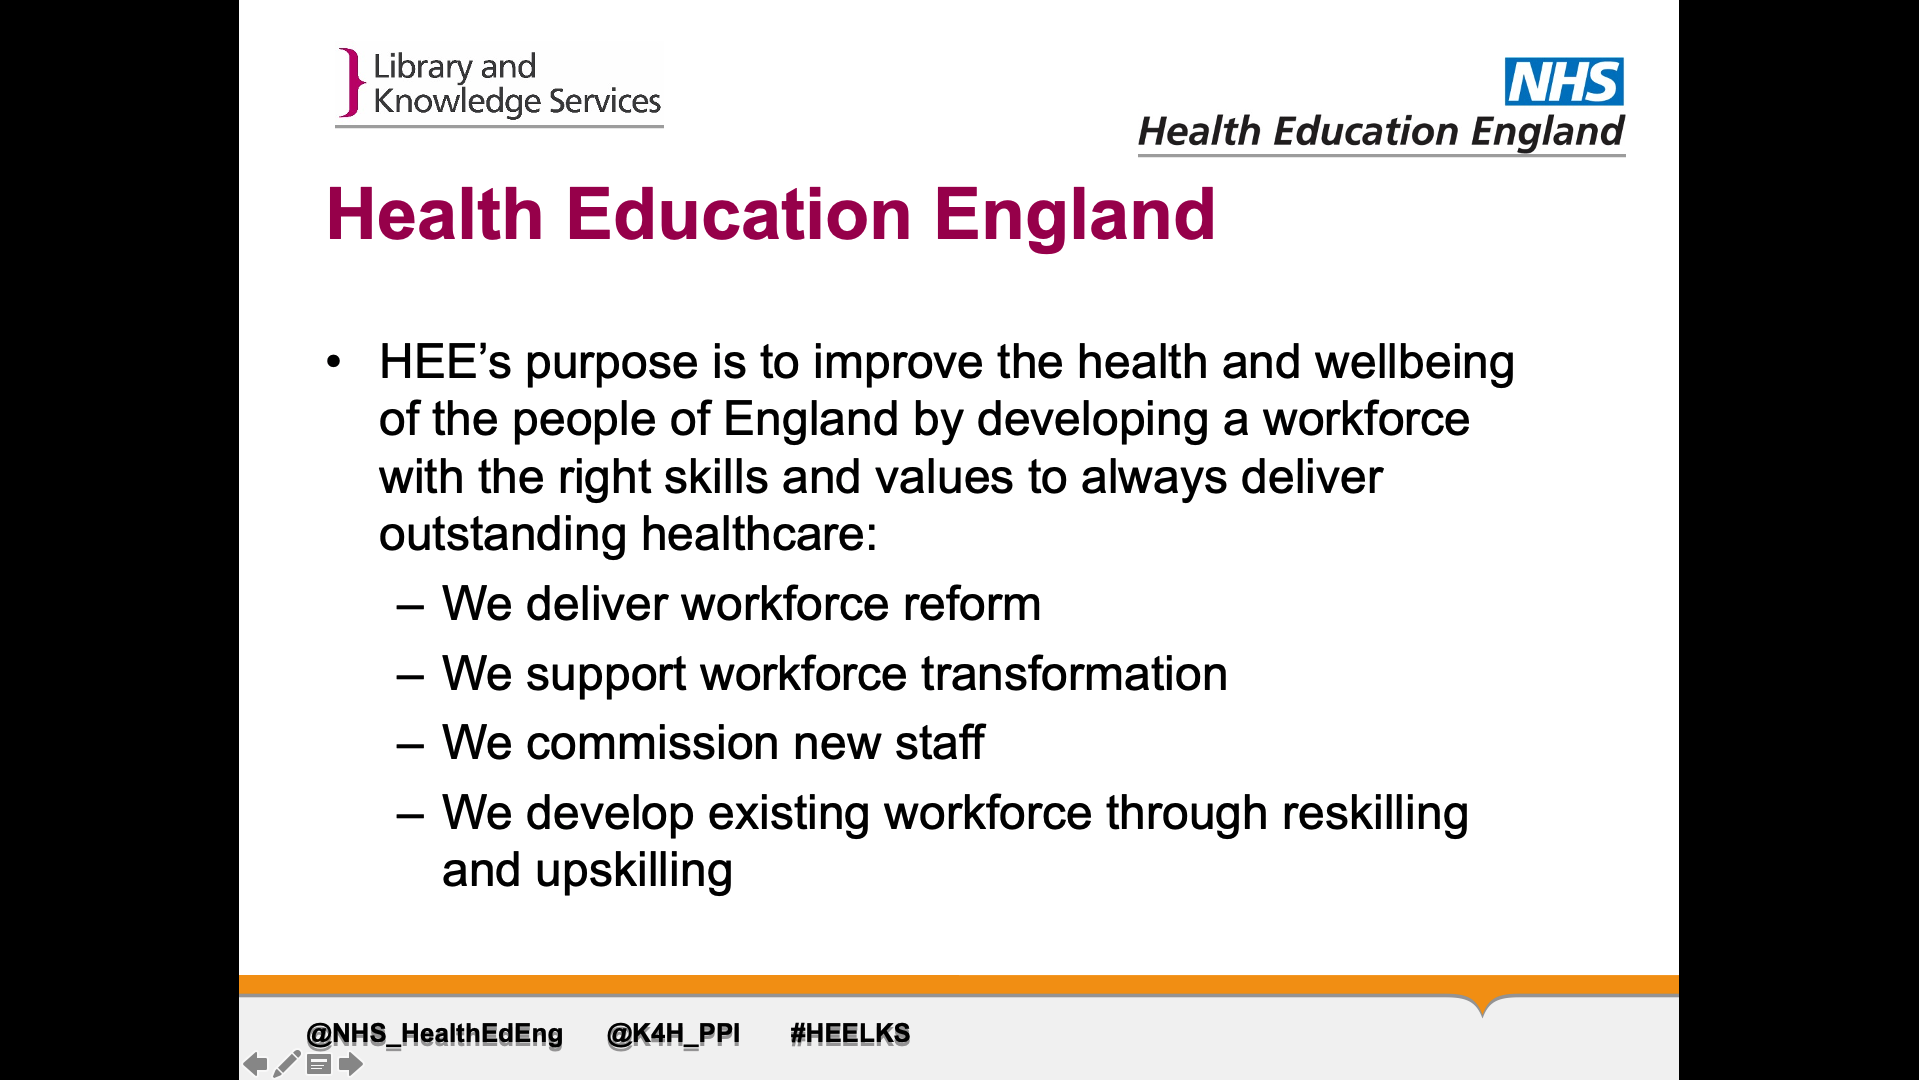 Title: Health Education England. Text on page: HEE’s purpose is to improve the health and wellbeing of the people of England by developing a workforce  with the right skills and values to always deliver outstanding healthcare: 1. We deliver workforce reform 2. we support workforce transformation 3. we commission new staff 4. we develop existing workforce through reskilling and upskilling